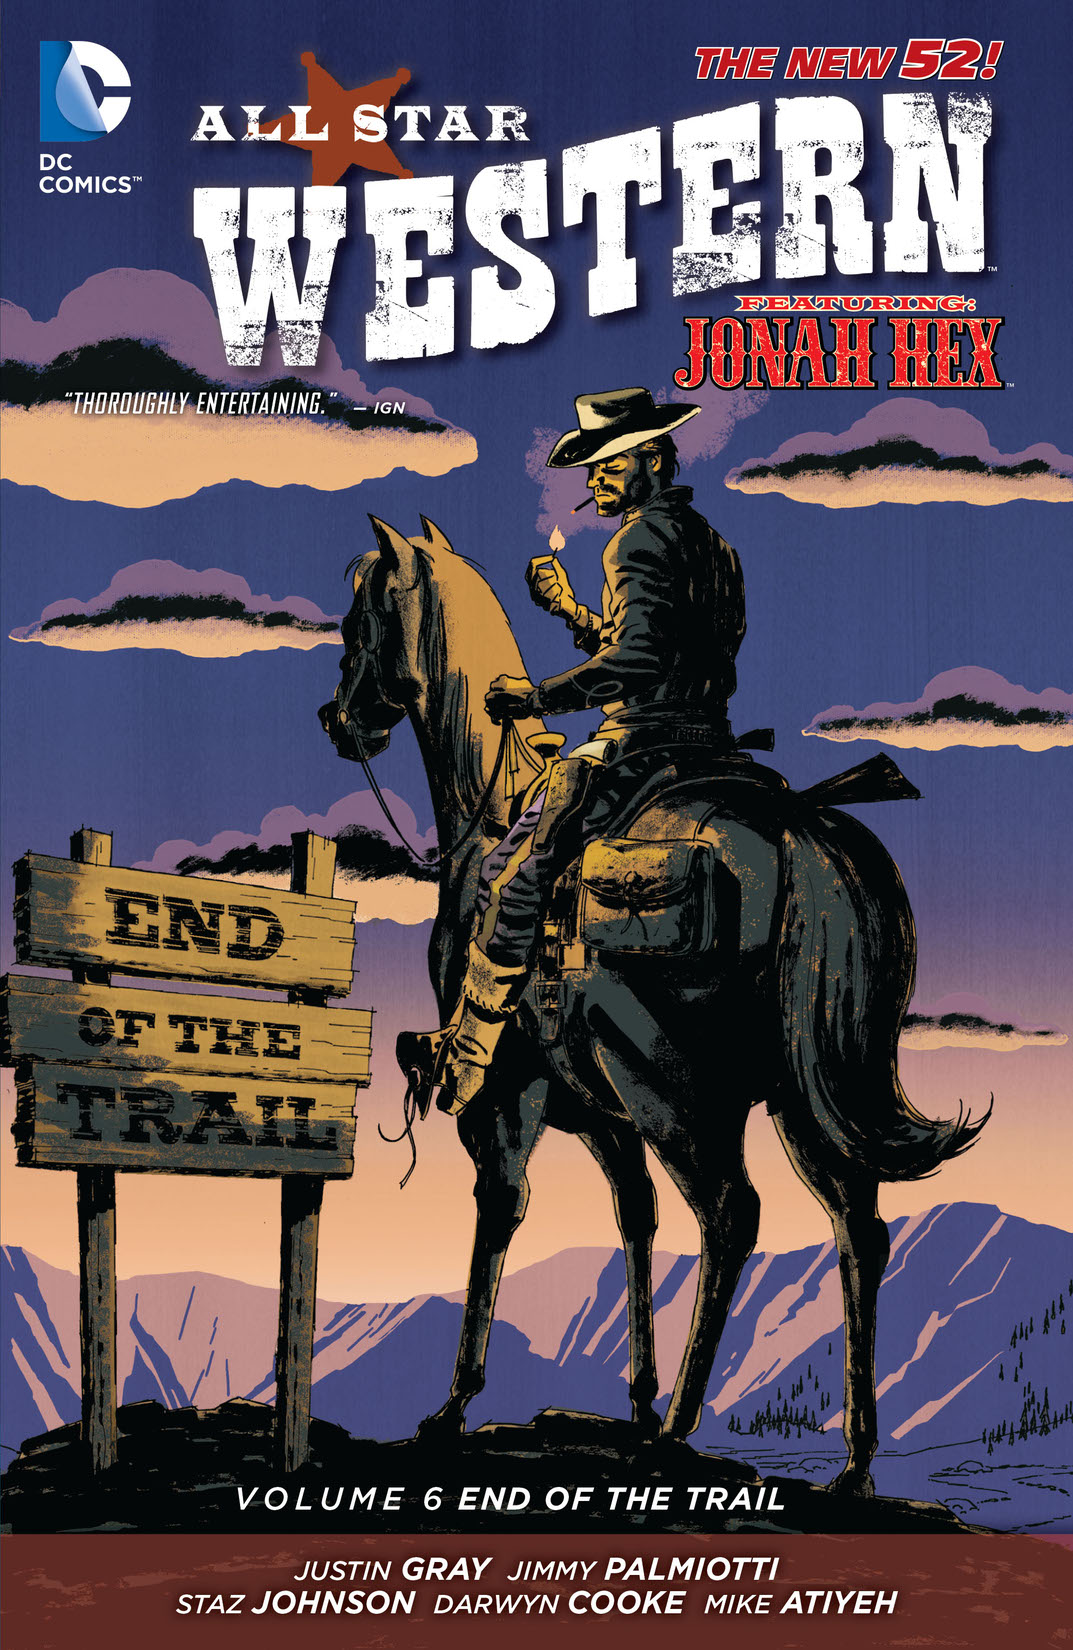 All Star Western Vol. 6: End of the Trail preview images